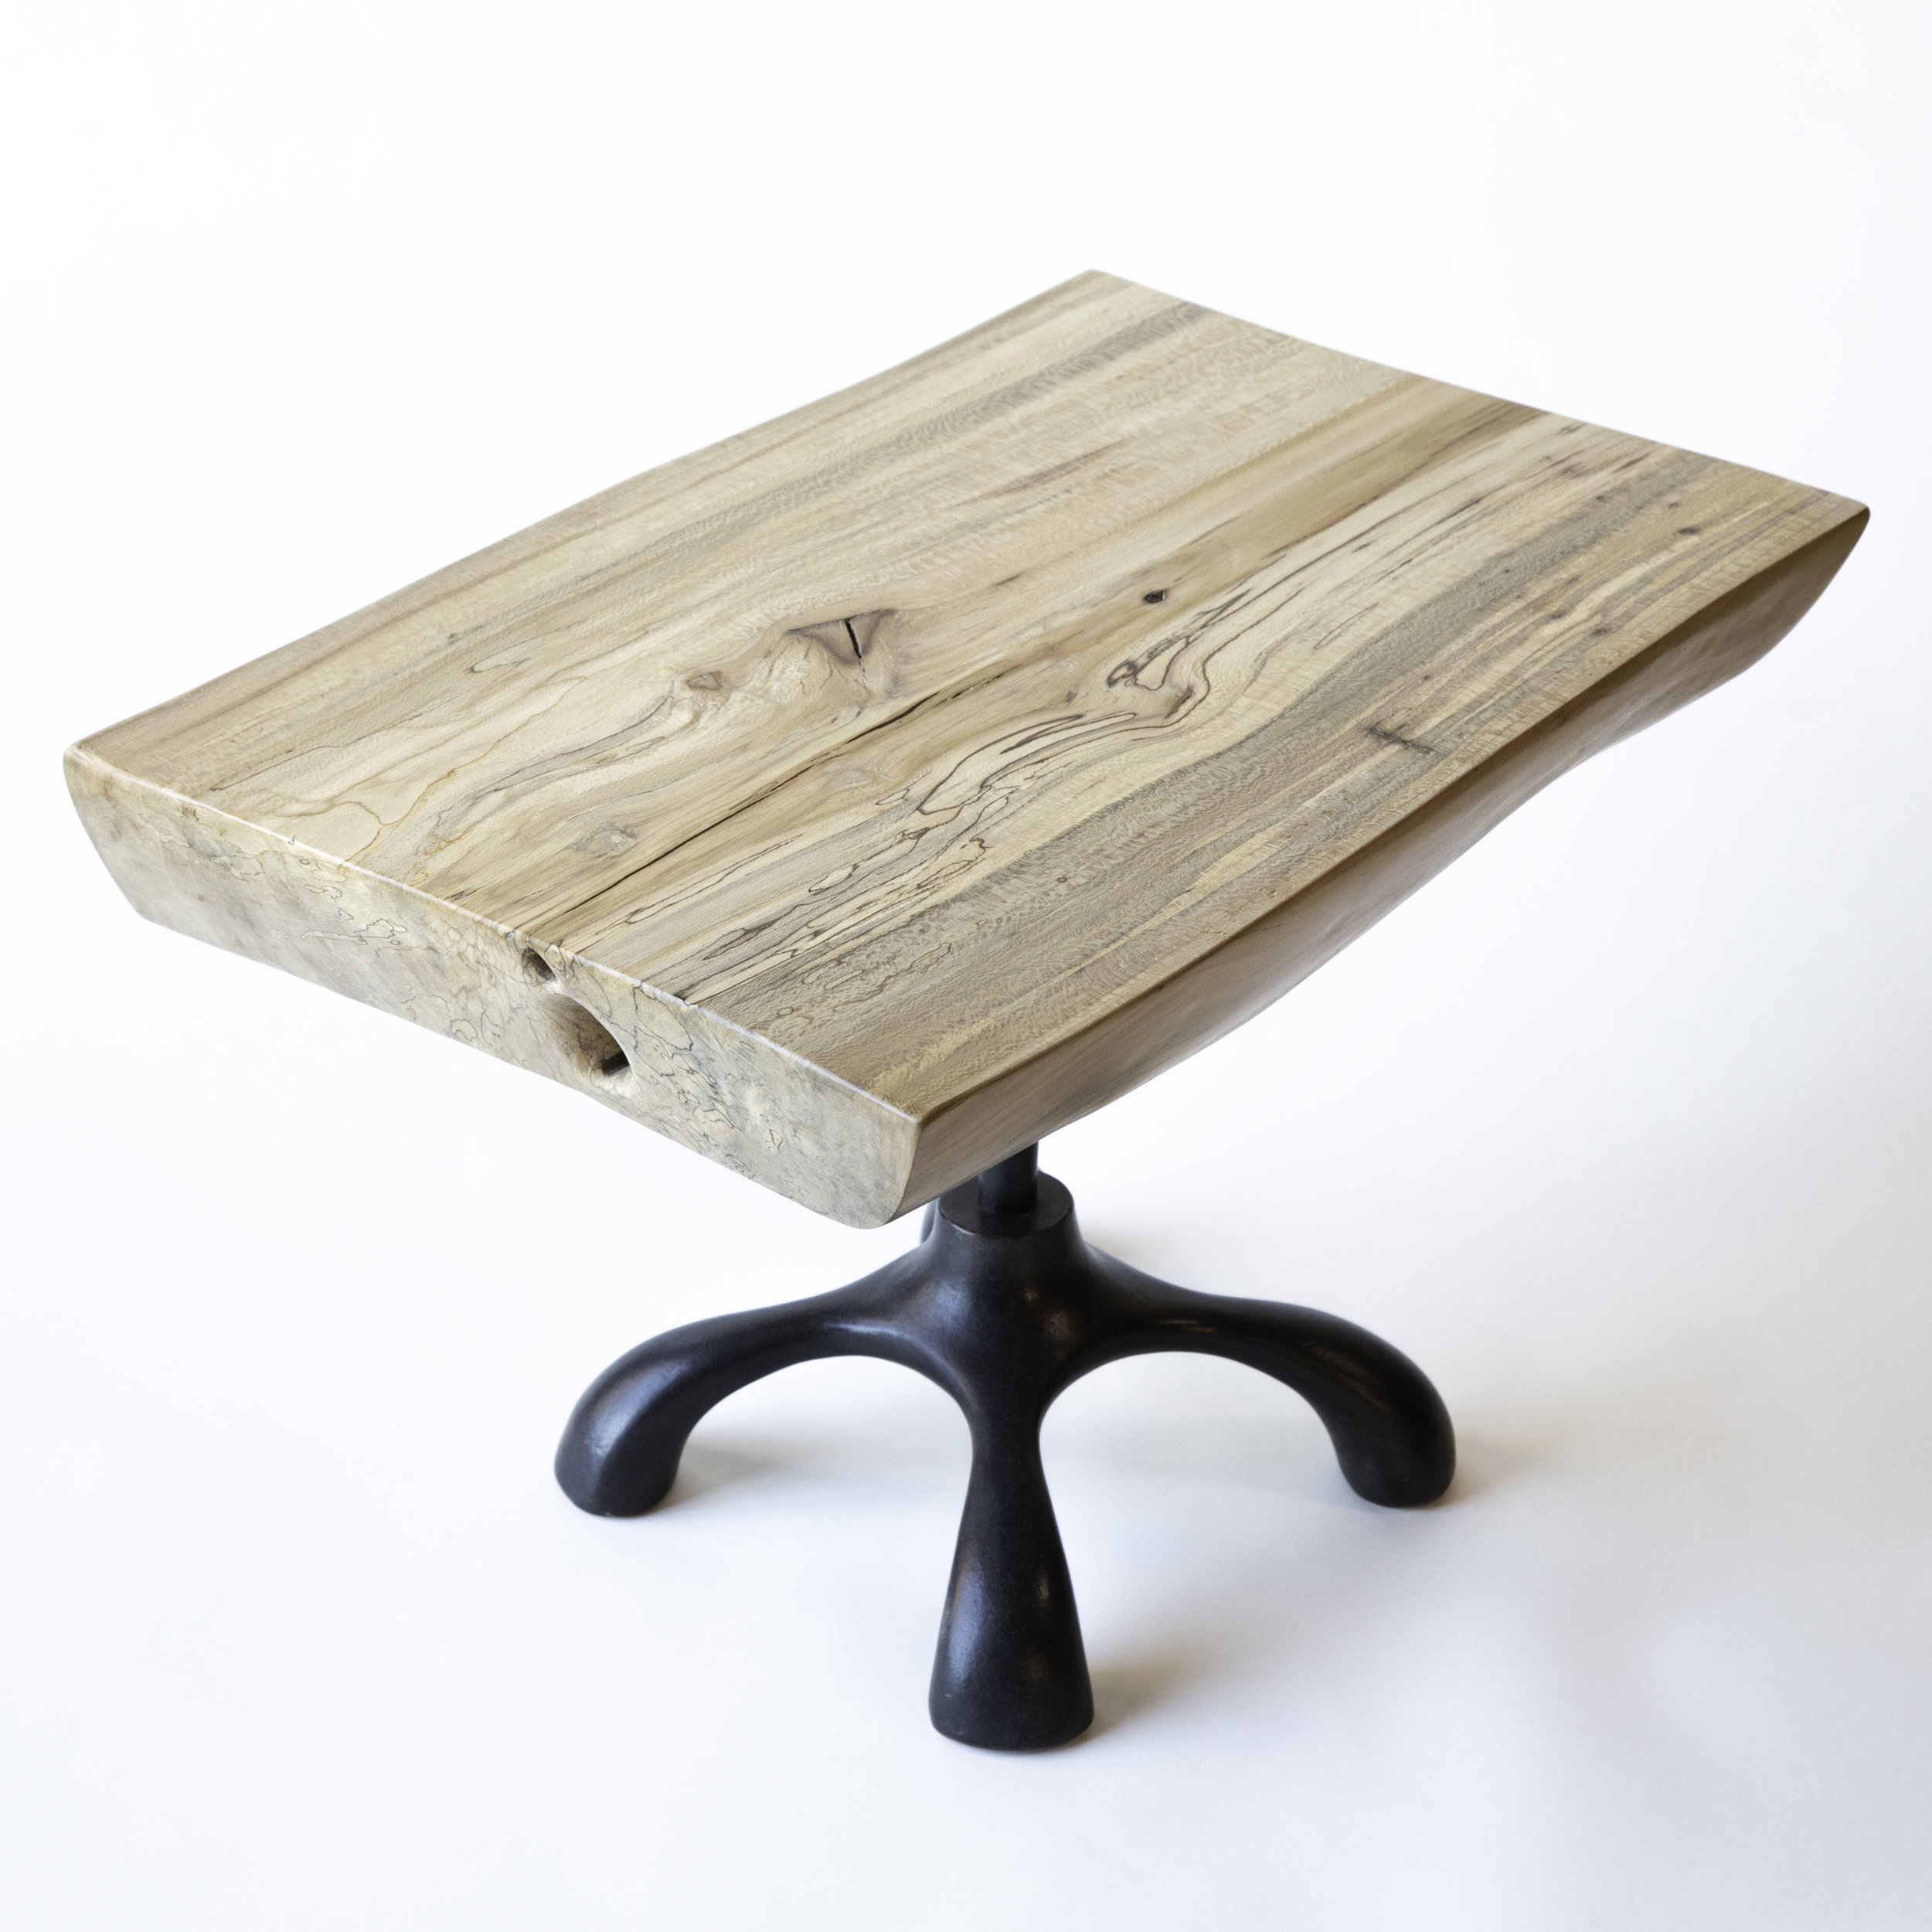 Spalted Sycamore Table